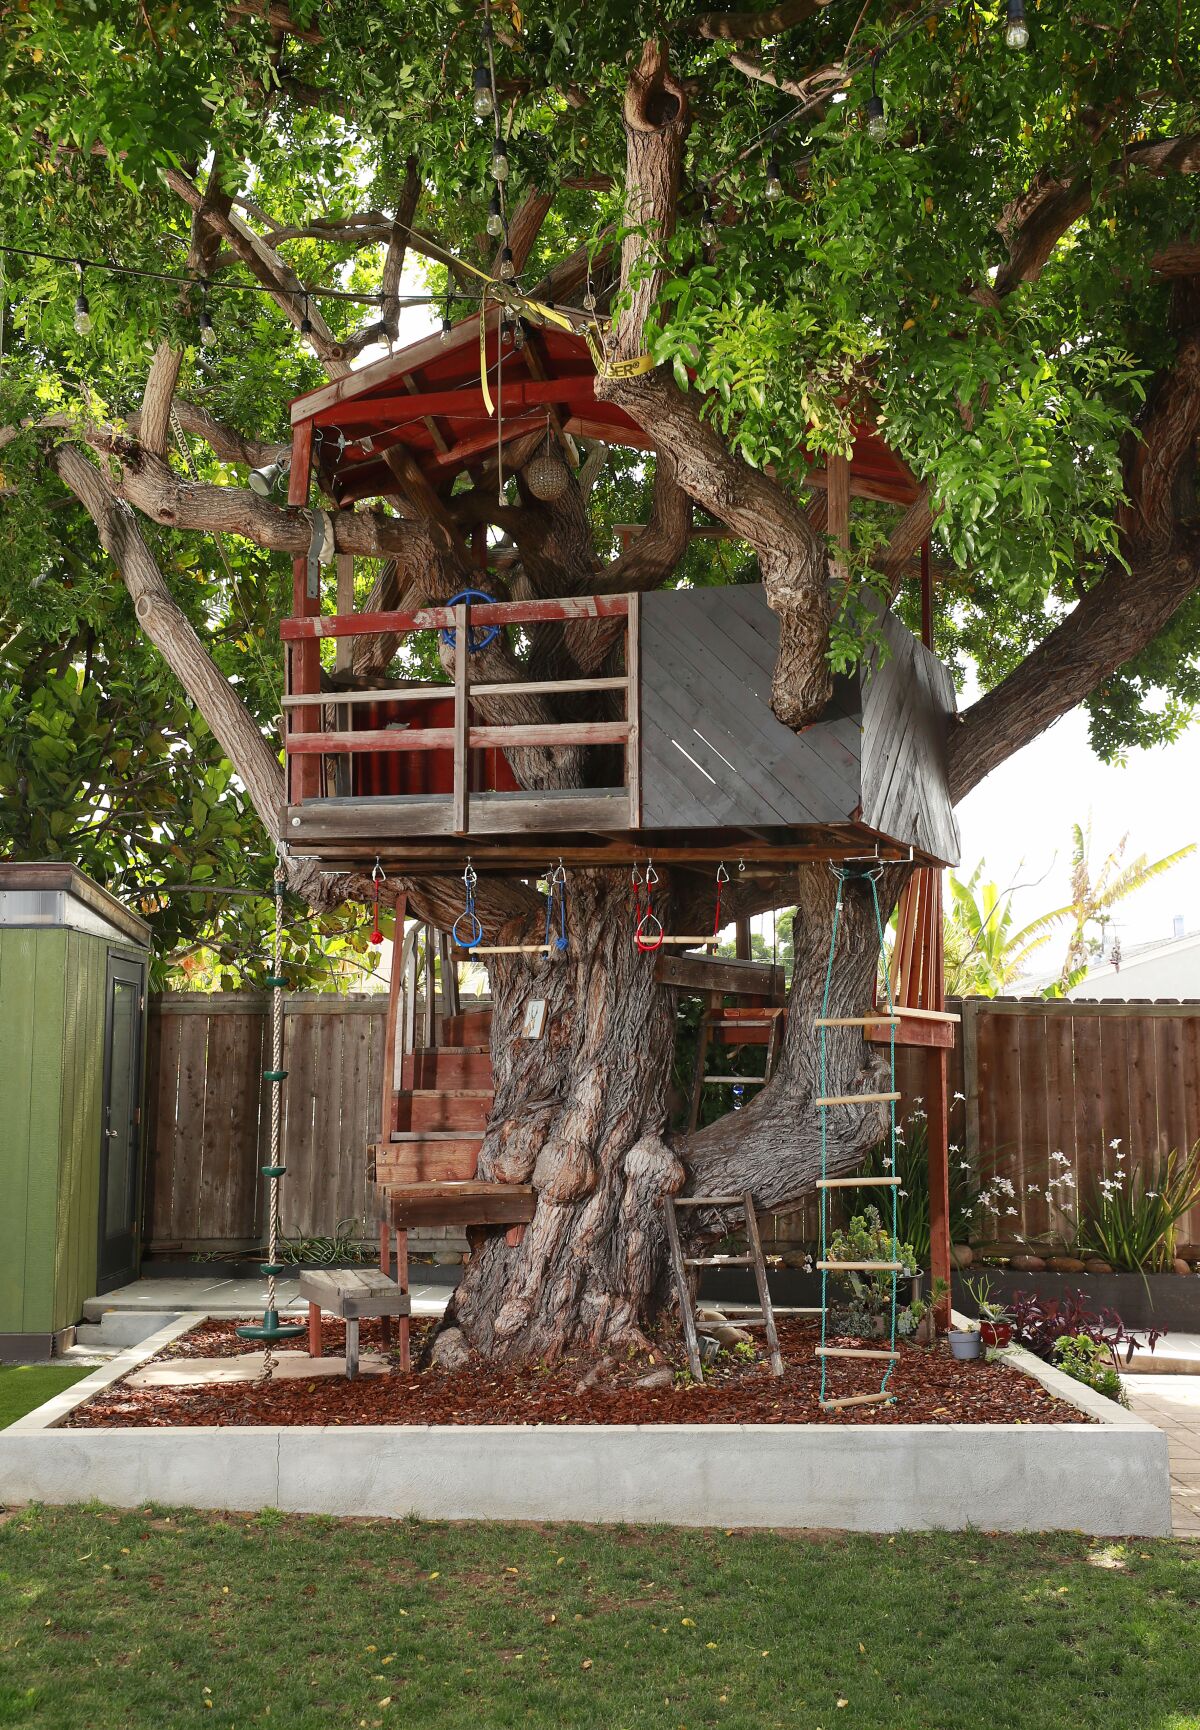 The large, shady Brazilian pepper tree was a selling point when Taylor and Metcalf bought the house.